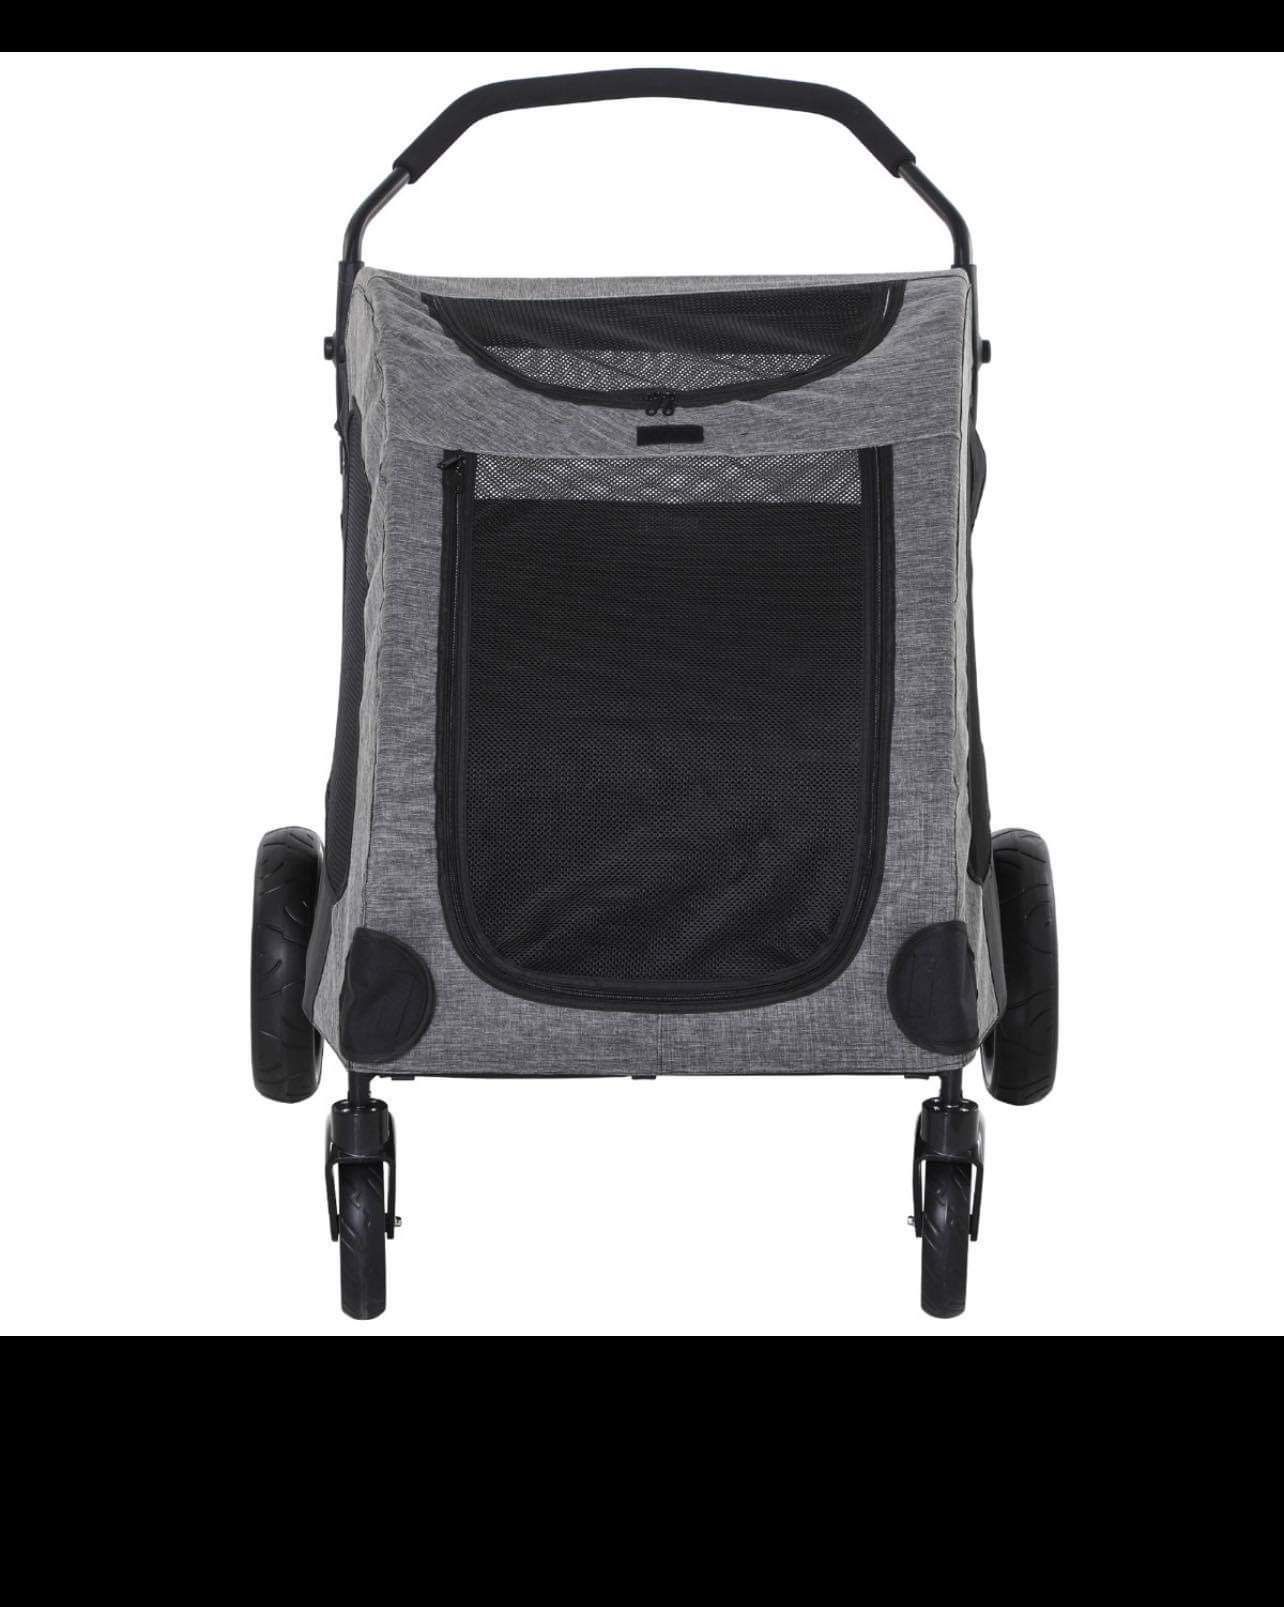 Foldable Dog Stroller with Storage Pocket, Oxford Fabric for Medium Size Dogs - Grey